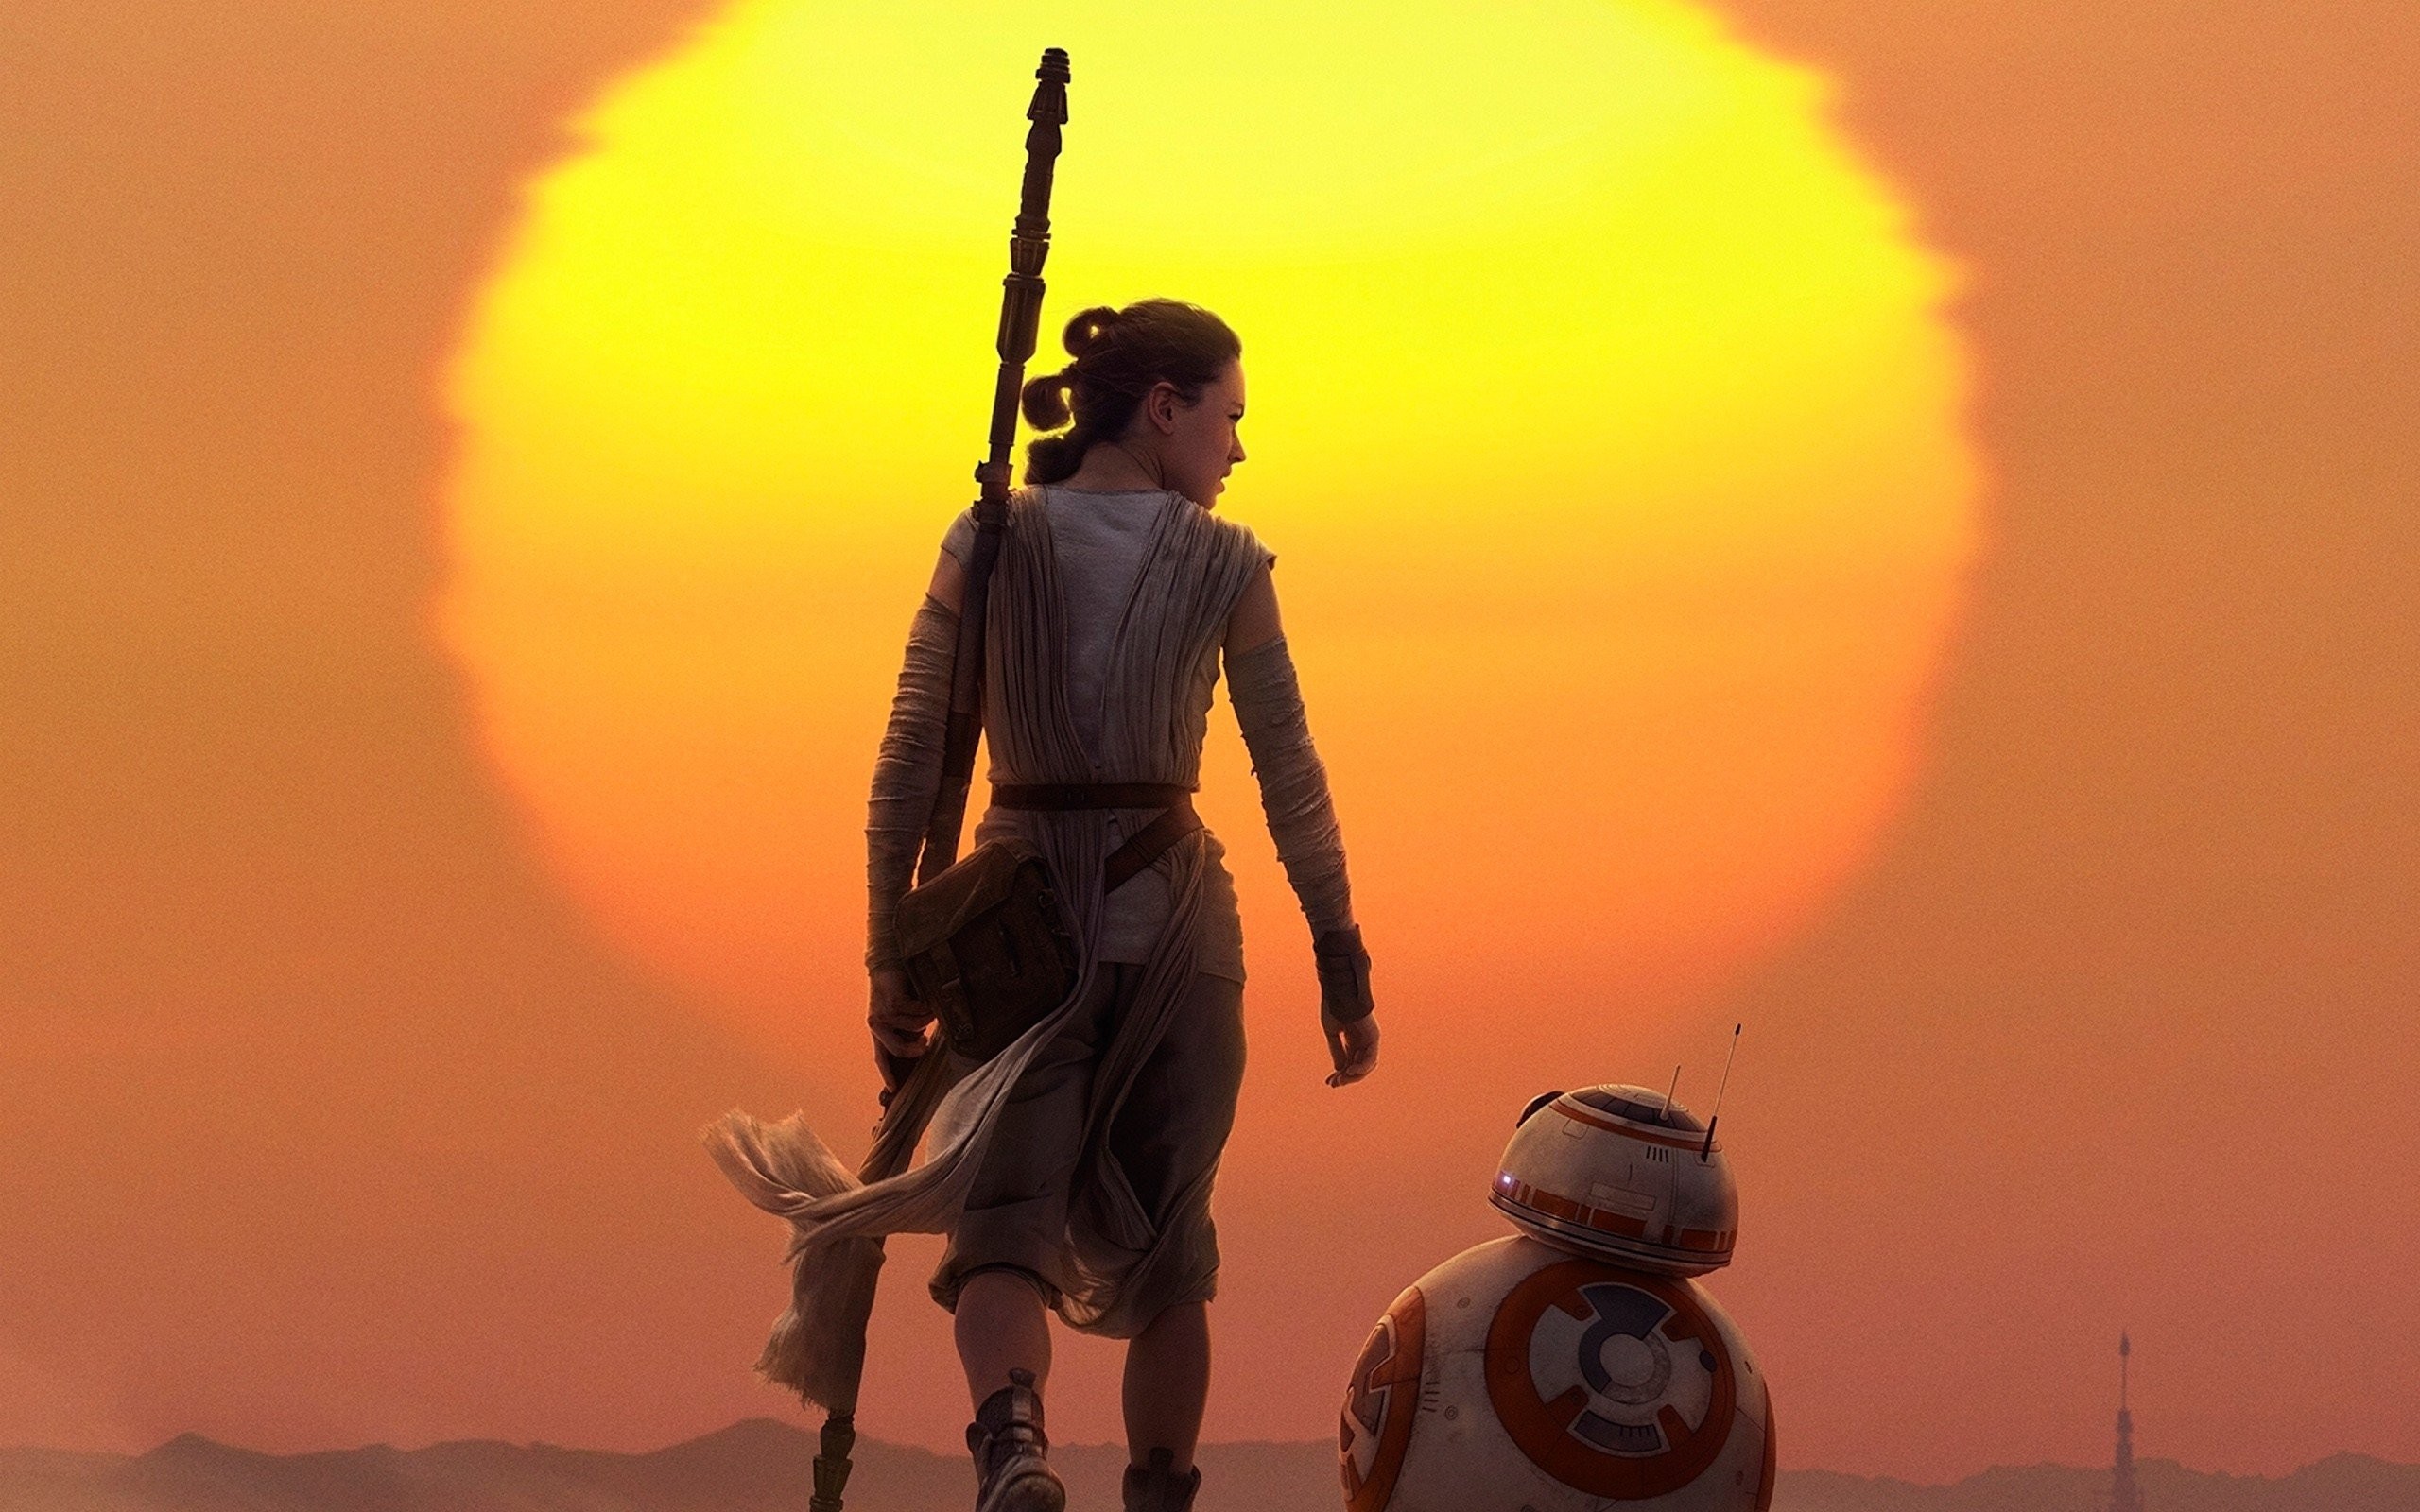 the force awakens guide epub free download